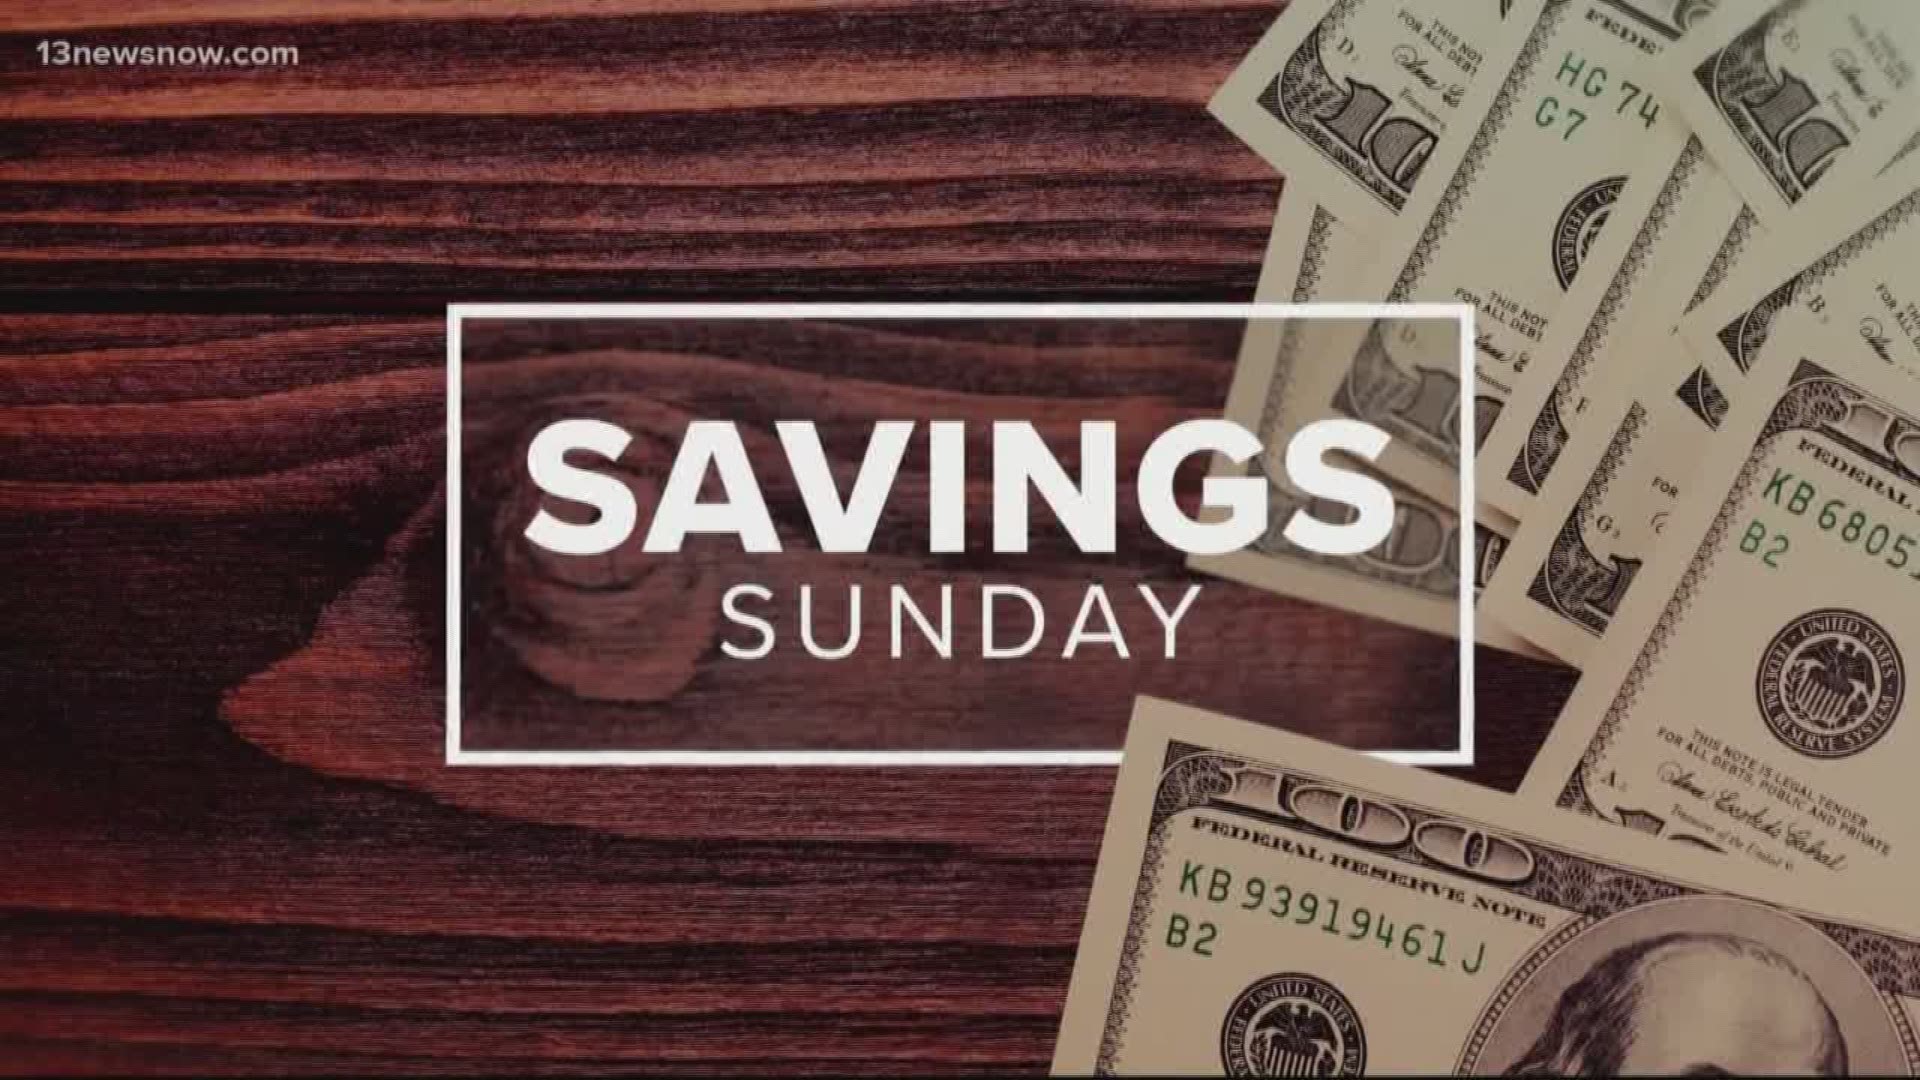 Laura Oliver from www.afrugalchick.com has your big savings for the week of November 10, 2019.